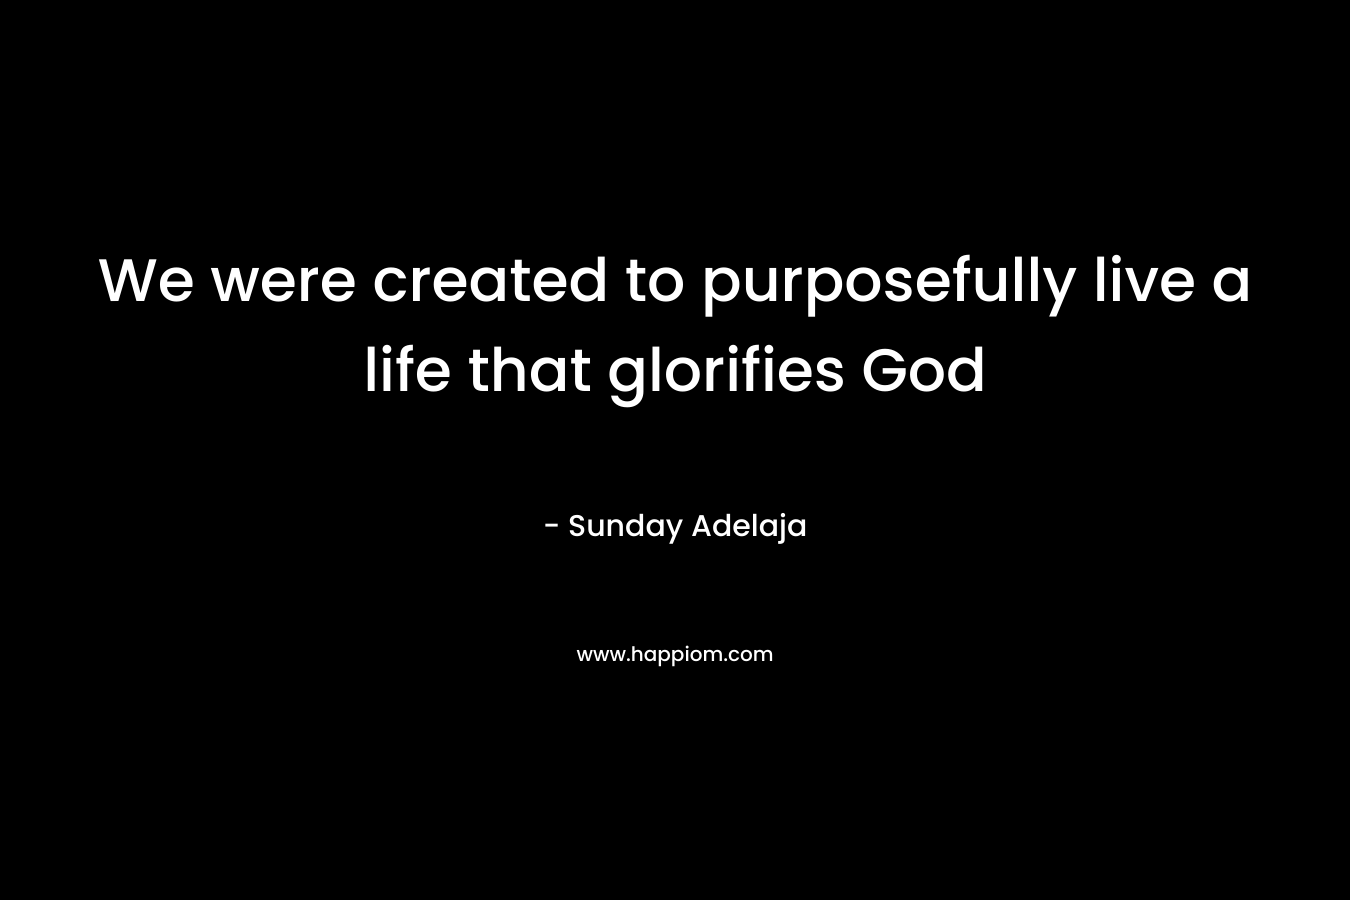 We were created to purposefully live a life that glorifies God